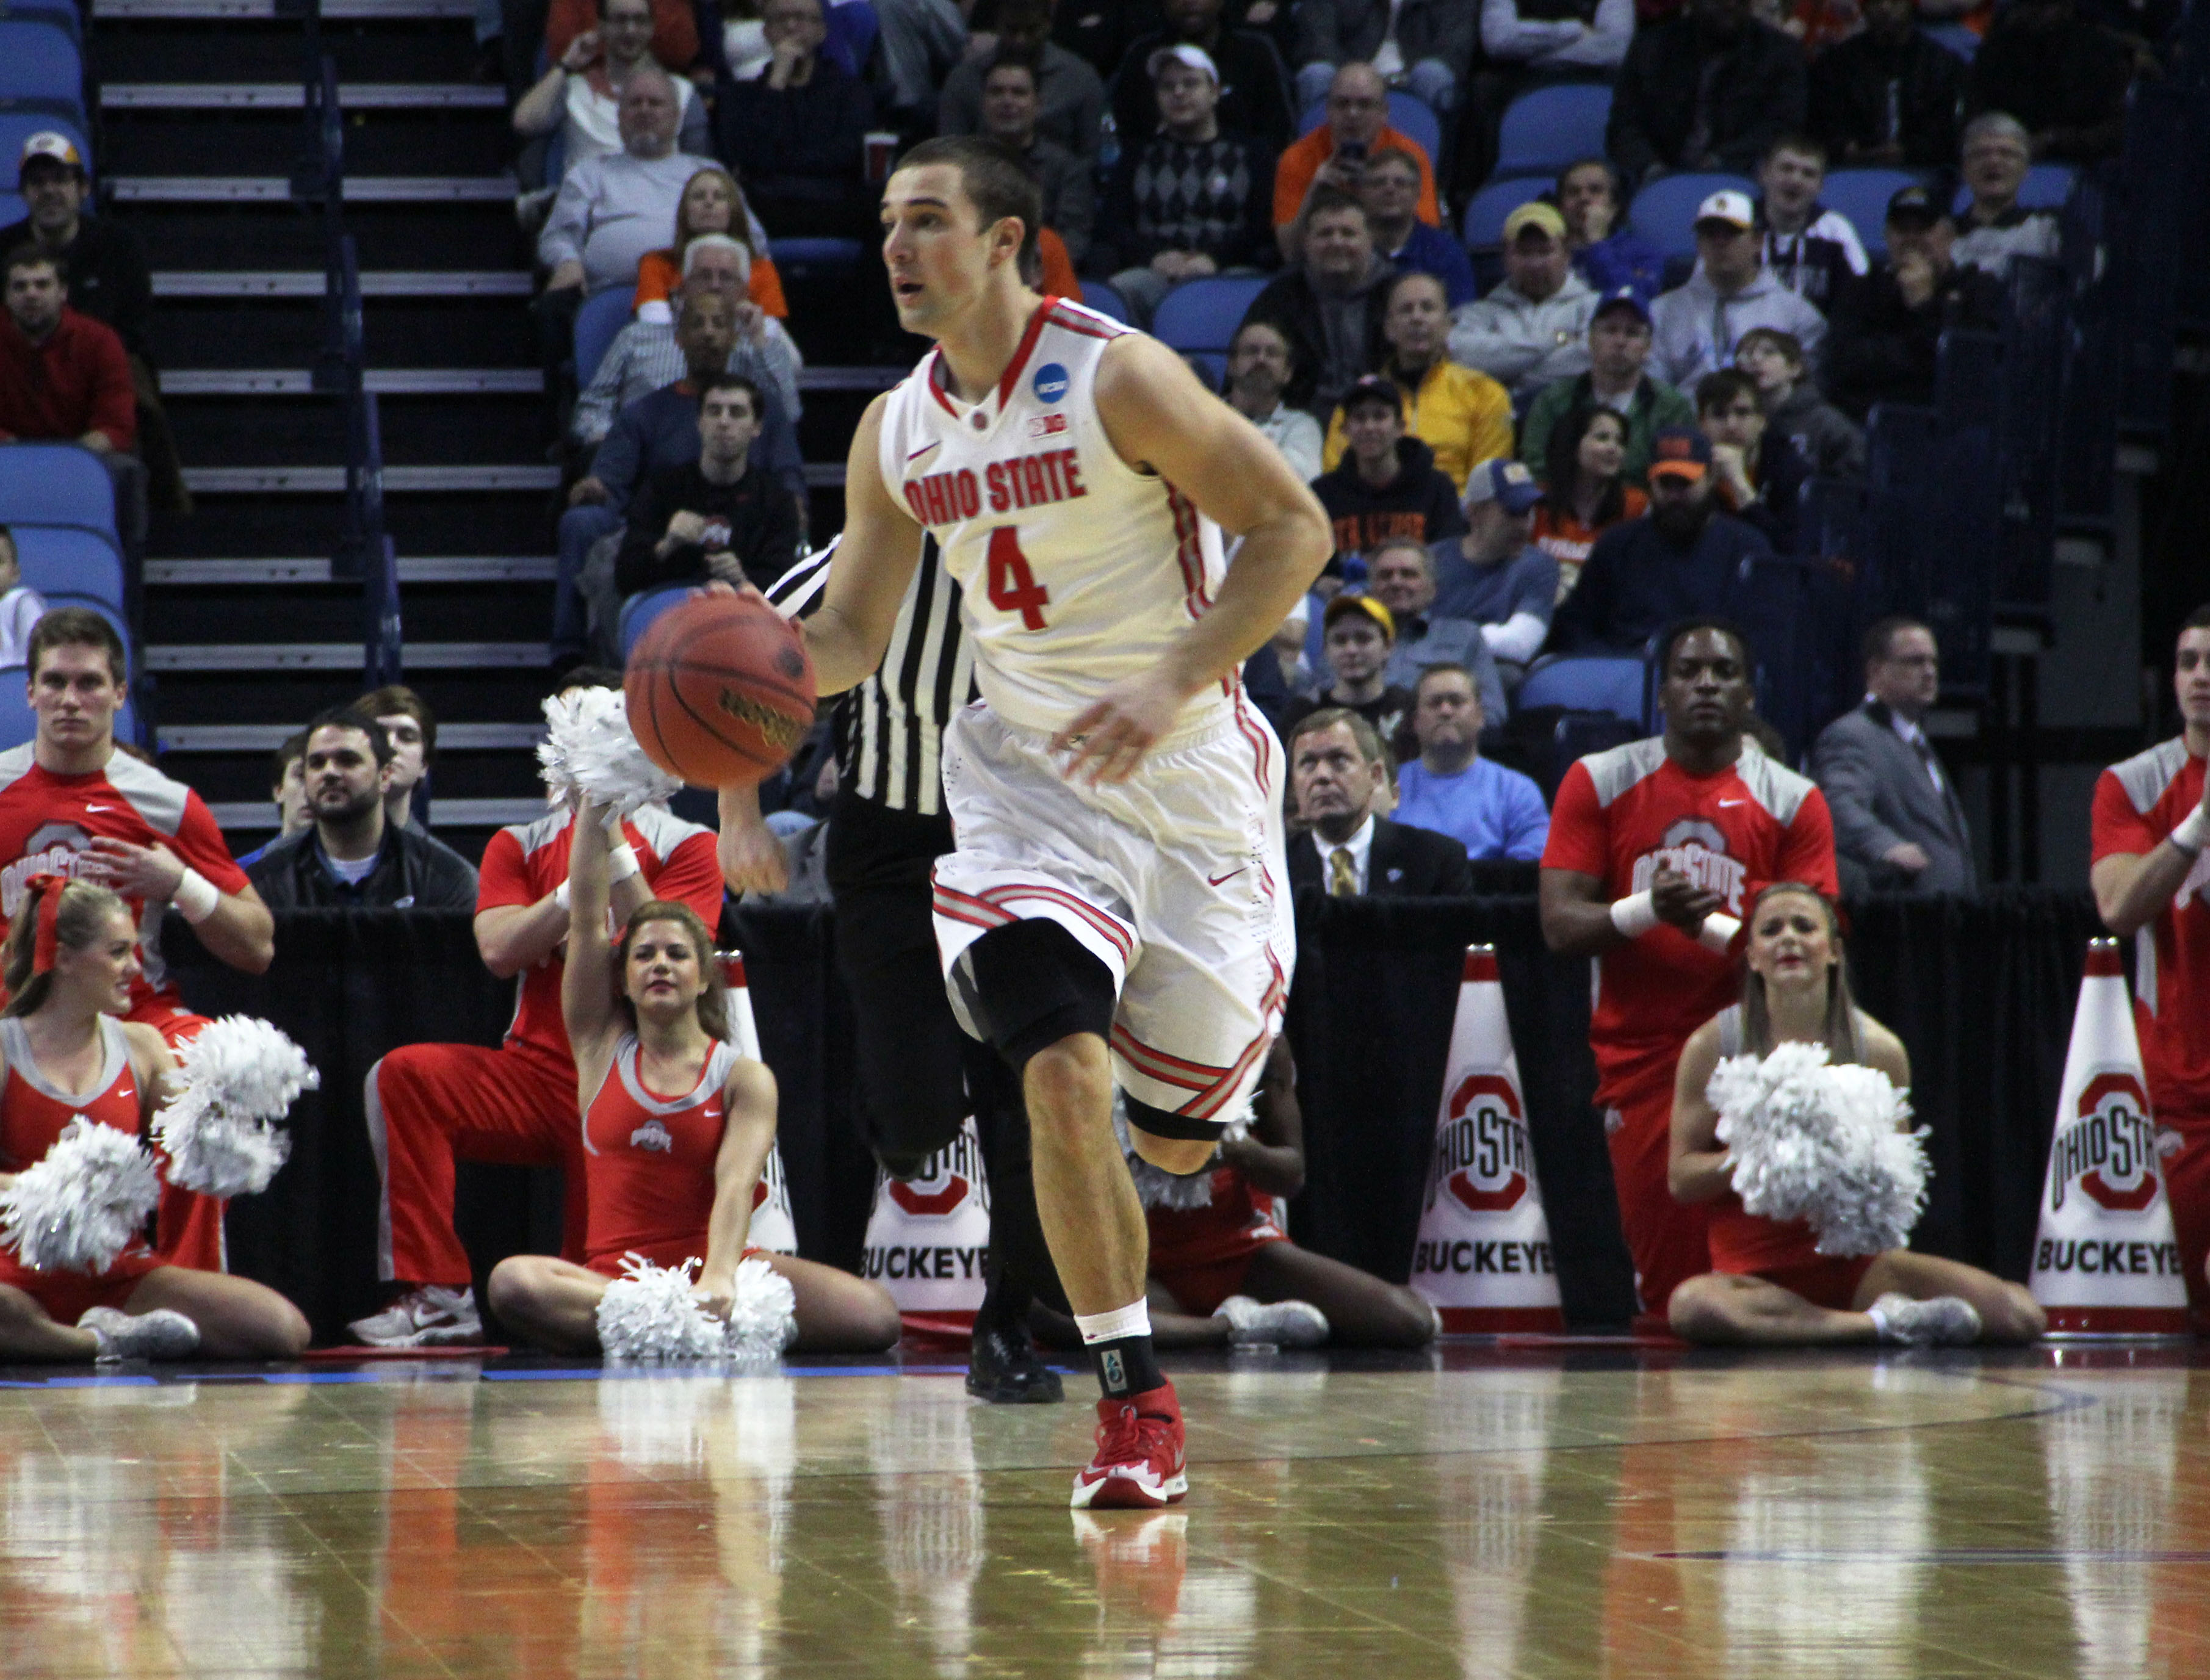 Senior guard Aaron Craft (4) carries the ball down the court in a game against Dayton. OSU lost, 60-59, at First Niagara Center March 20.